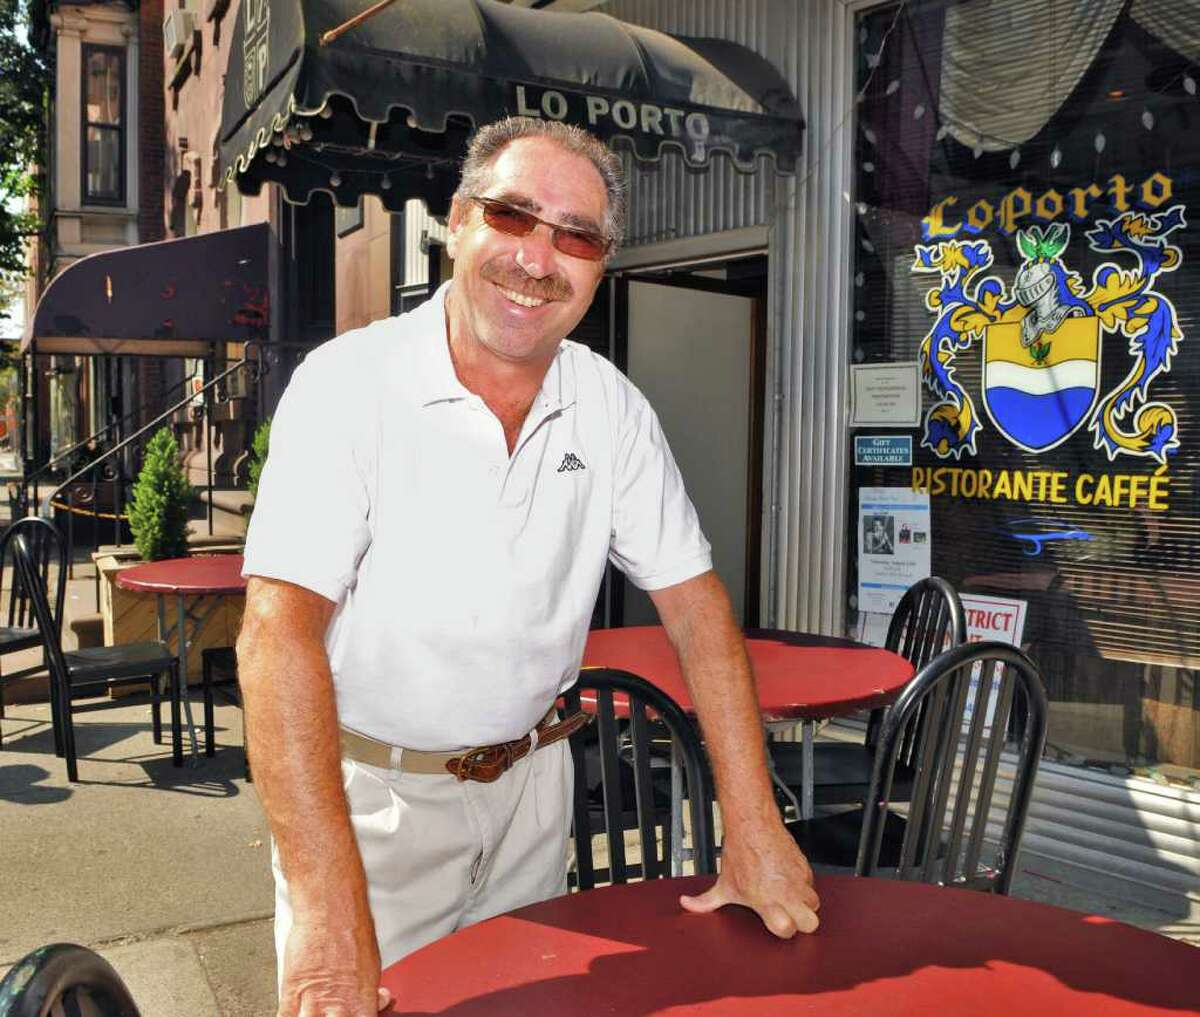 Michael LoPorto, outside LoPorto's Restaurant in Troy, Sept. 2, 2011, was long a familiar presence on Fourth Street holding court outside his restaurant, LoPorto Ristorante Caffee, known simply as LoPorto’s when he wasn’t inside cooking and chatting with patrons.